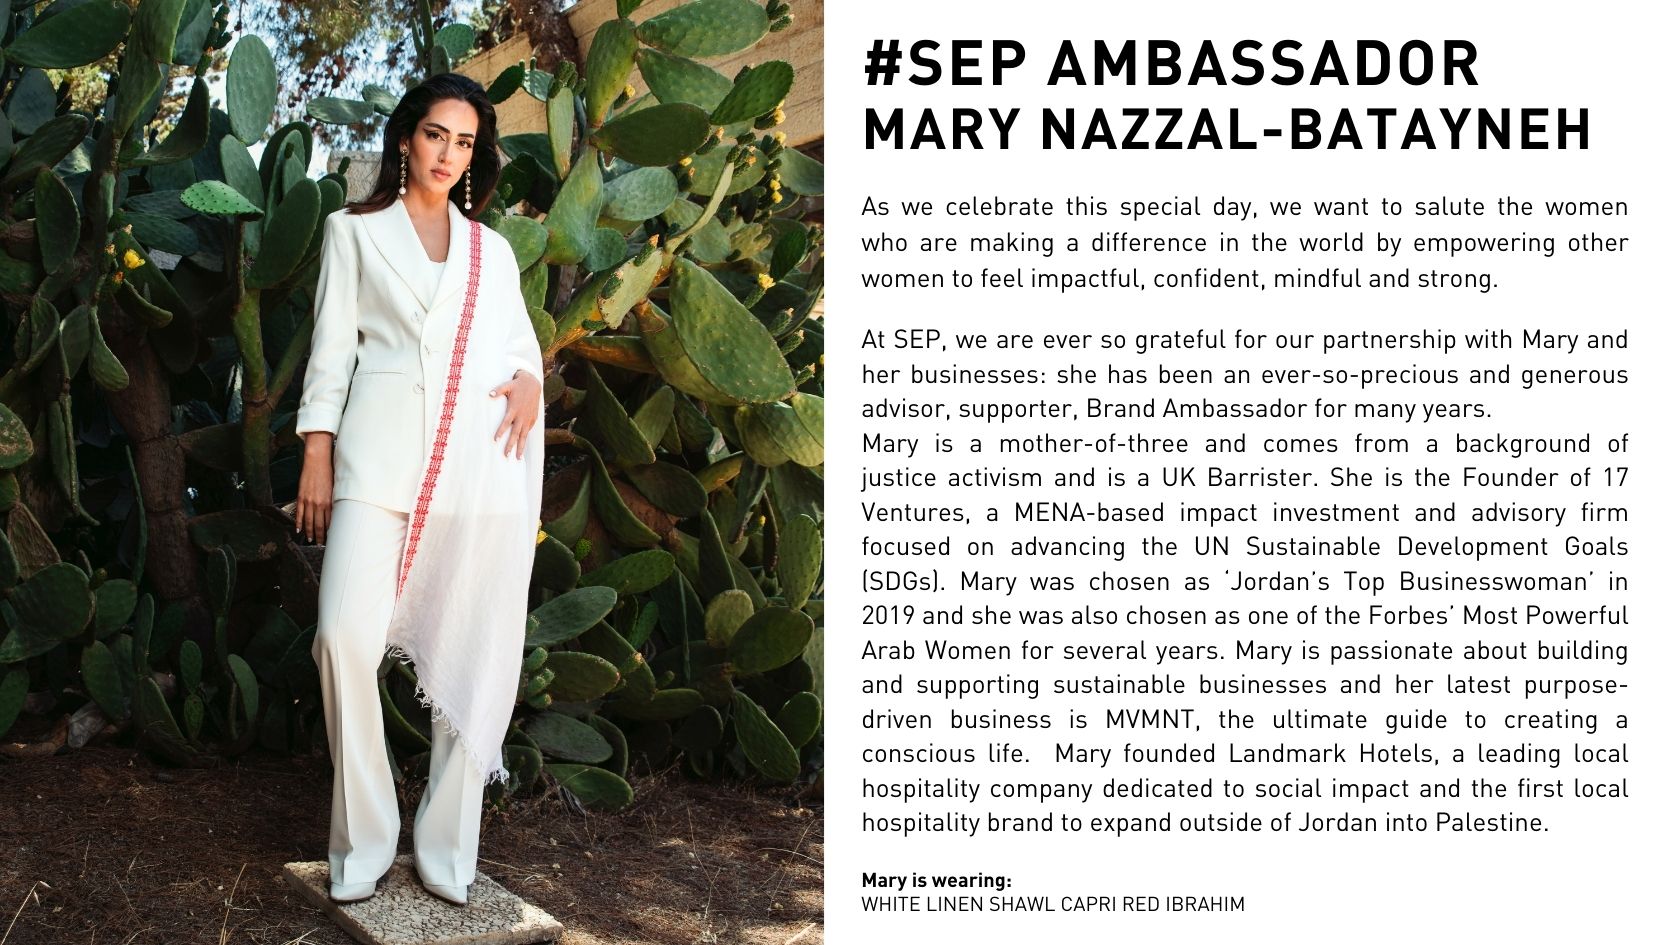 As we celebrate this special day, we want to salute the women who are making a difference in the world by empowering other women to feel impactful, confident, mindful and strong. At SEP, we are ever so grateful for our partnership with Mary and her businesses: she has been an ever-so-precious and generous advisor, supporter, Brand Ambassador for many years. Mary is a mother-of-three and comes from a background of justice activism and is a UK Barrister. She is the Founder of 17 Ventures, a MENA-based impact investment and advisory firm focused on advancing the UN Sustainable Development Goals (SDGs). Mary was chosen as ‘Jordan’s Top Businesswoman’ in 2019 and she was also chosen as one of the Forbes’ Most Powerful Arab Women for several years. Mary is passionate about building and supporting sustainable businesses and her latest purpose-driven business is MVMNT, the ultimate guide to creating a conscious life.  Mary founded Landmark Hotels, a leading local hospitality company dedicated to social impact and the first local hospitality brand to expand outside of Jordan into Palestine.